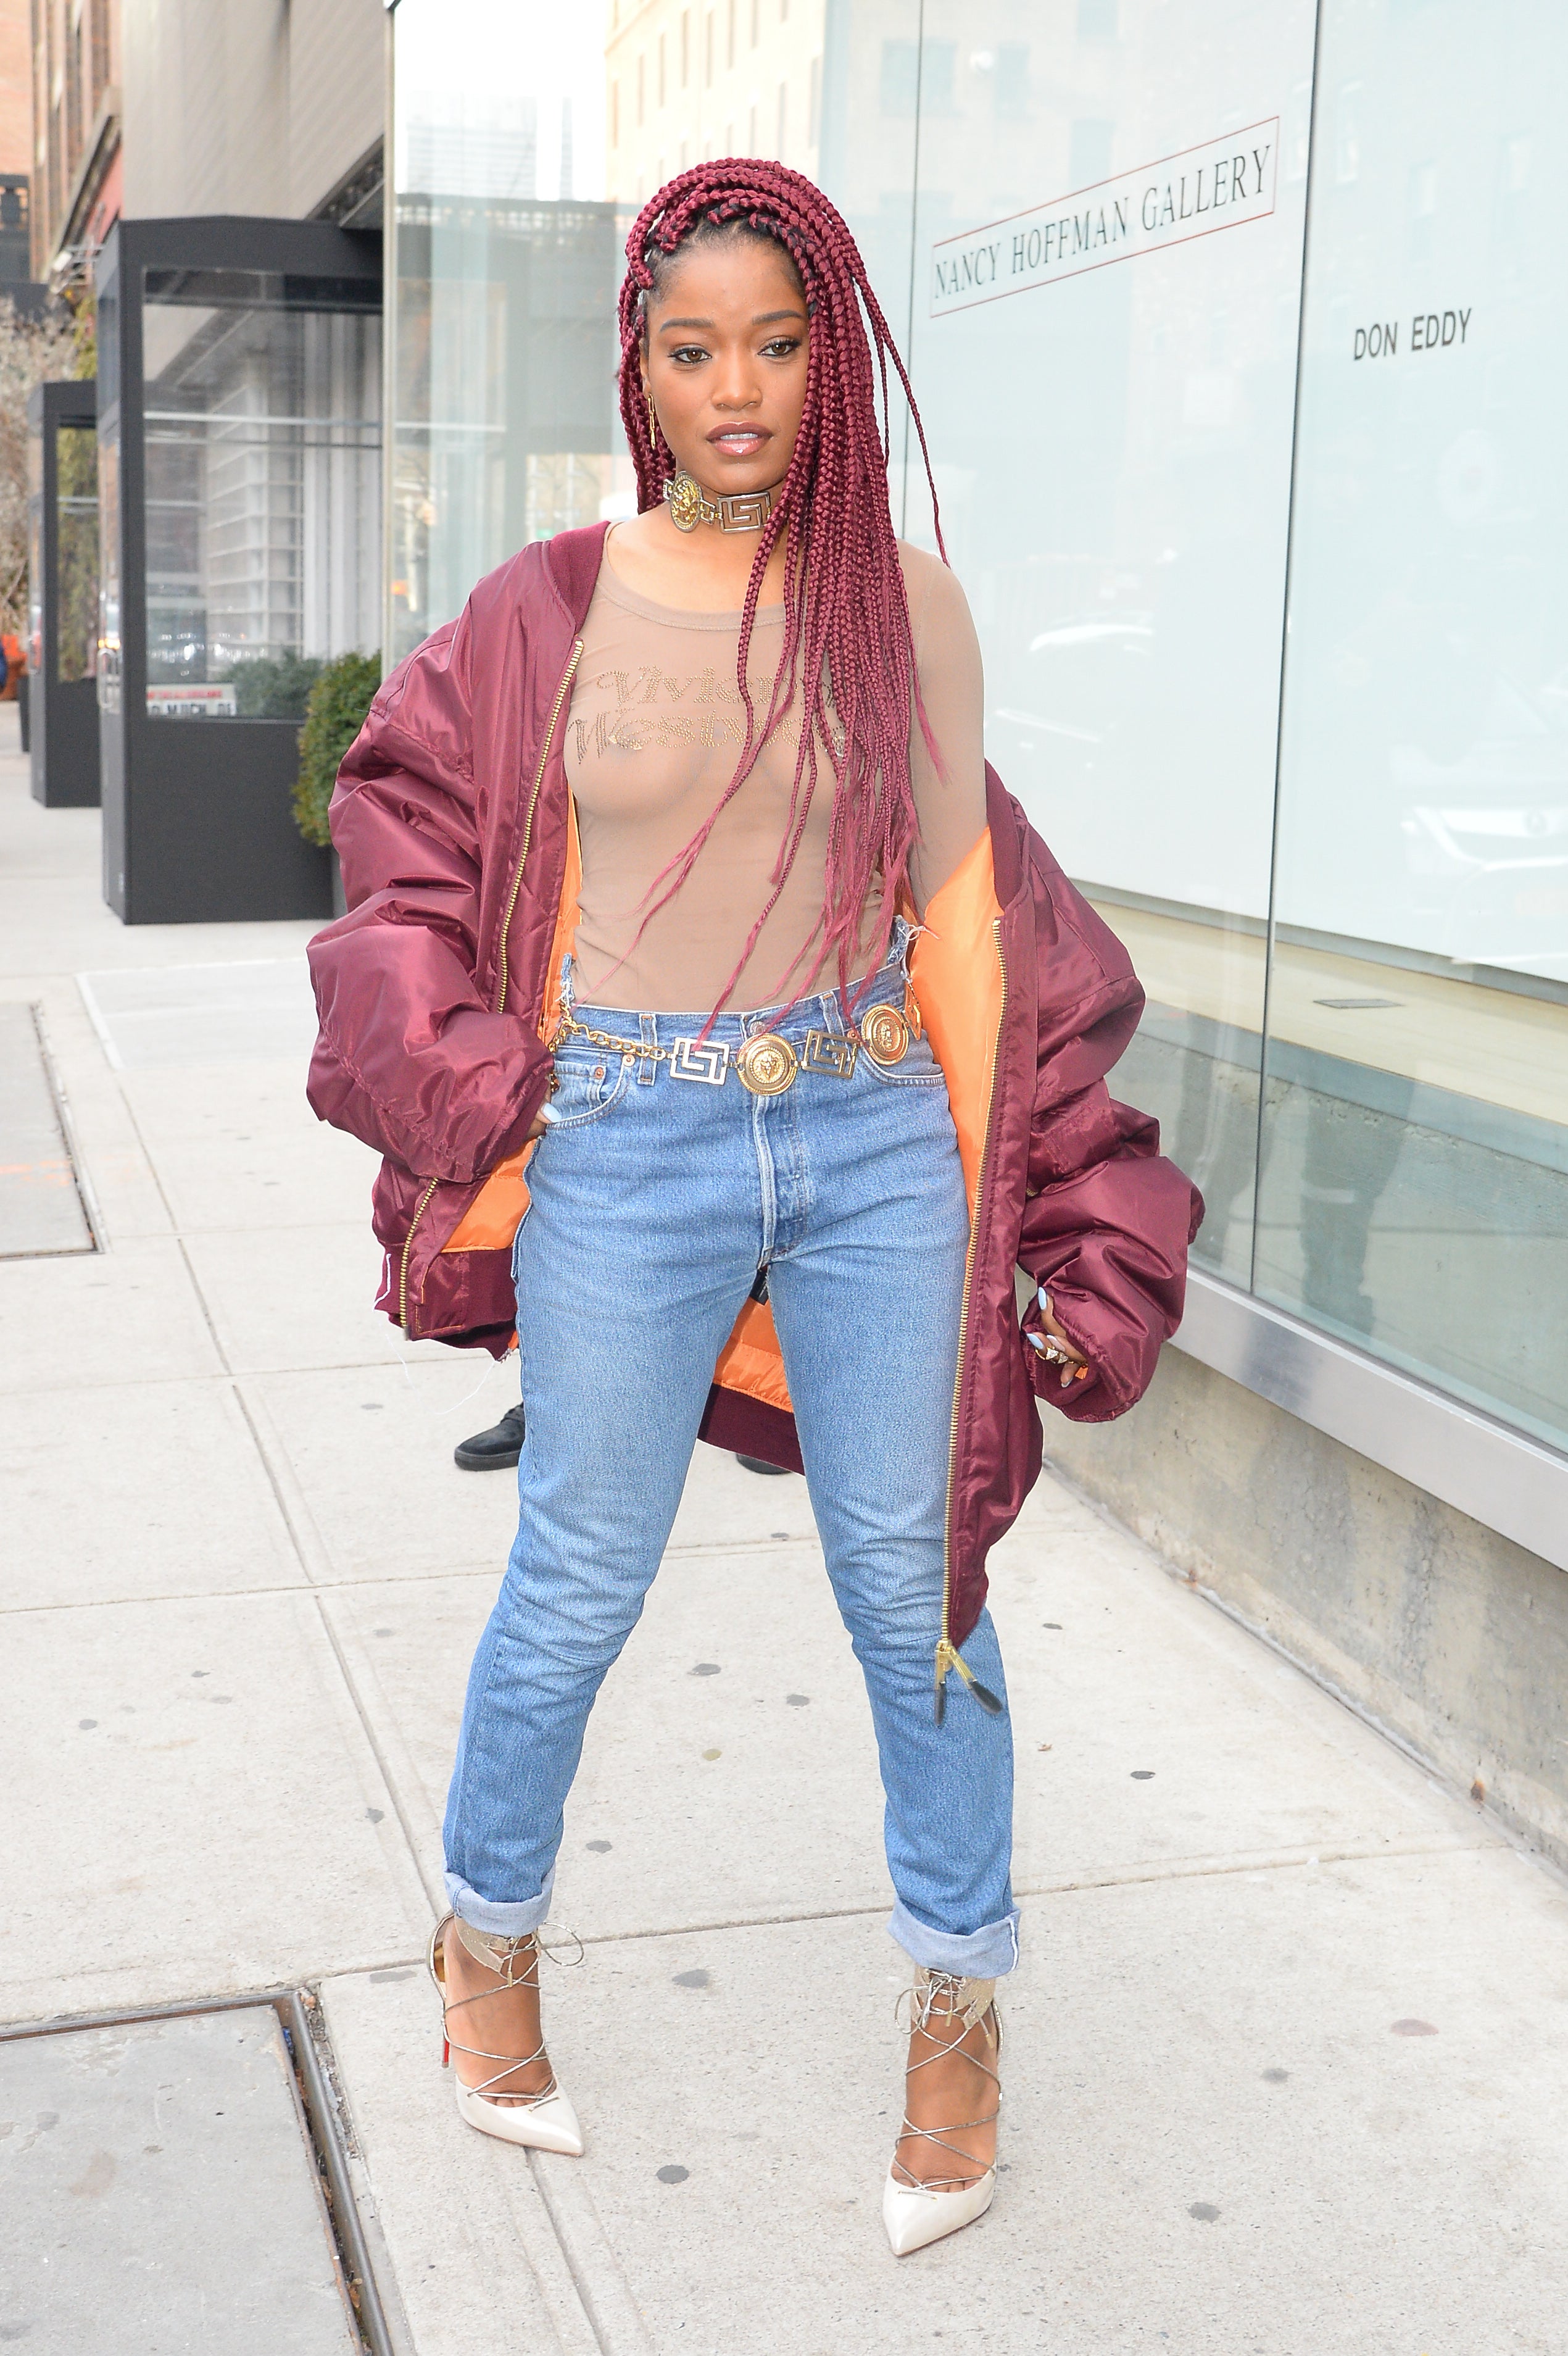 Keke Palmer Puts On Real Life Fashion Show and We’re Here for It